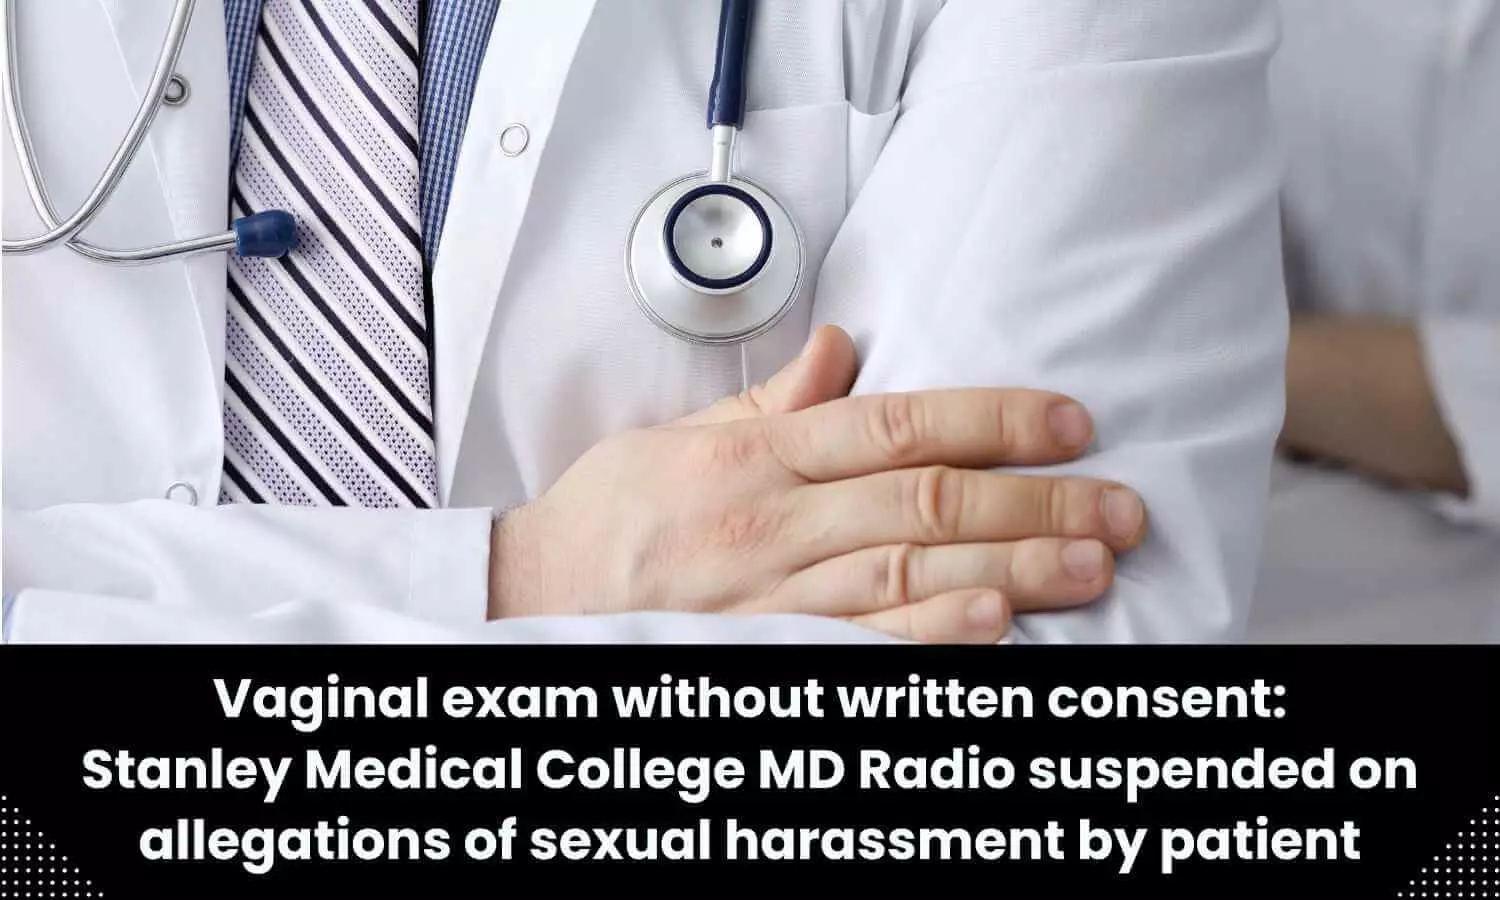 Stanley Medical College MD Radio suspended on allegations of sexual harassment by patient